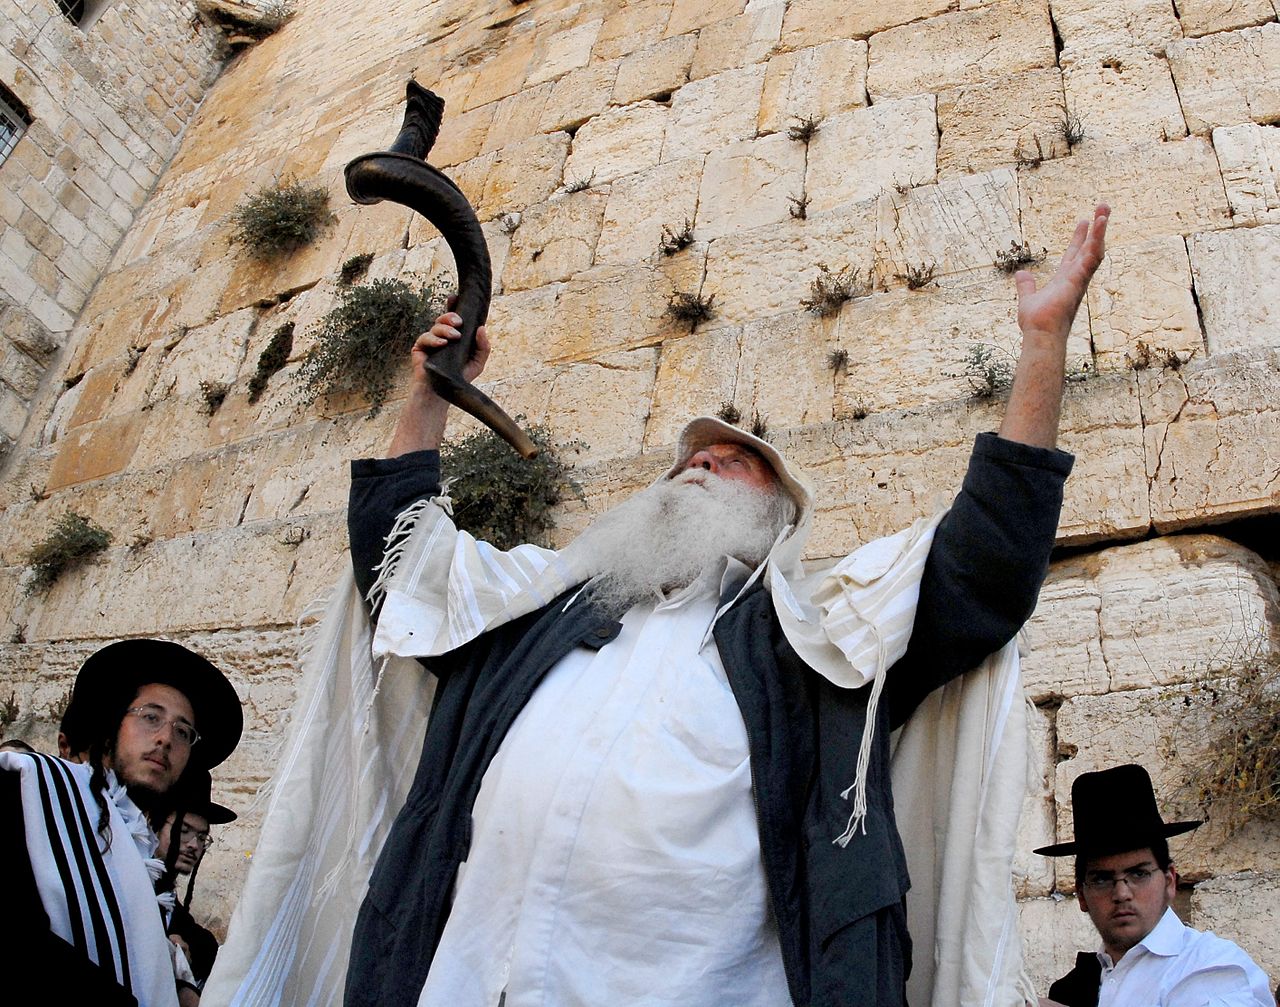 Women To Be Able To Pray At Western Wall As Israel Approves Mixed Sex Site The Japan Times